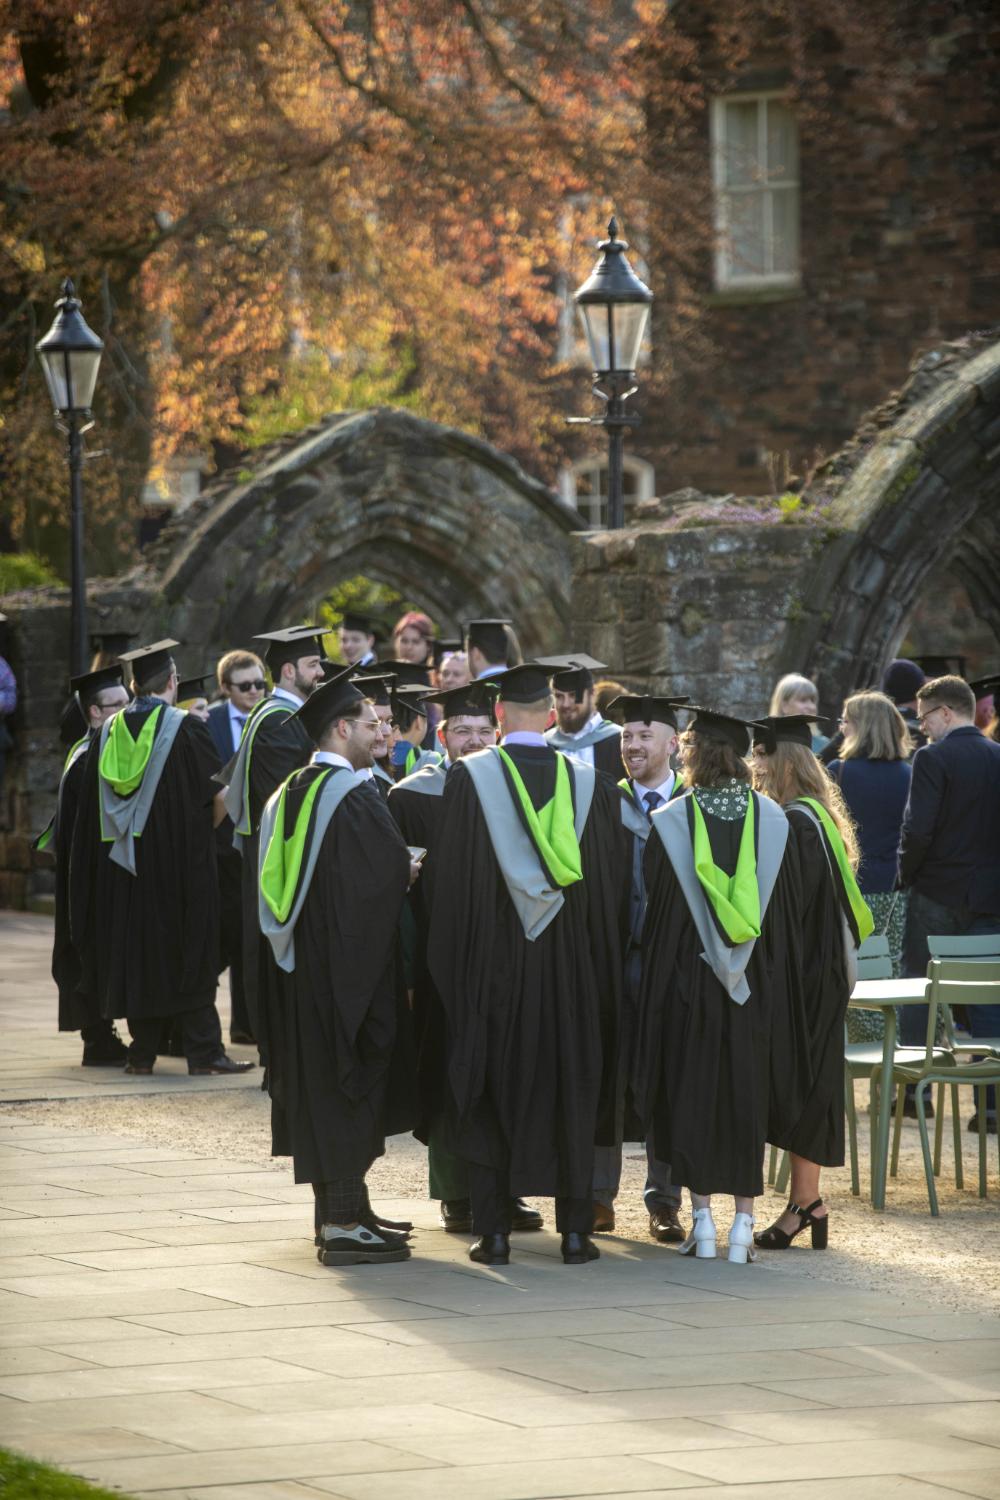 Graduands gather in the Fratry courtyard